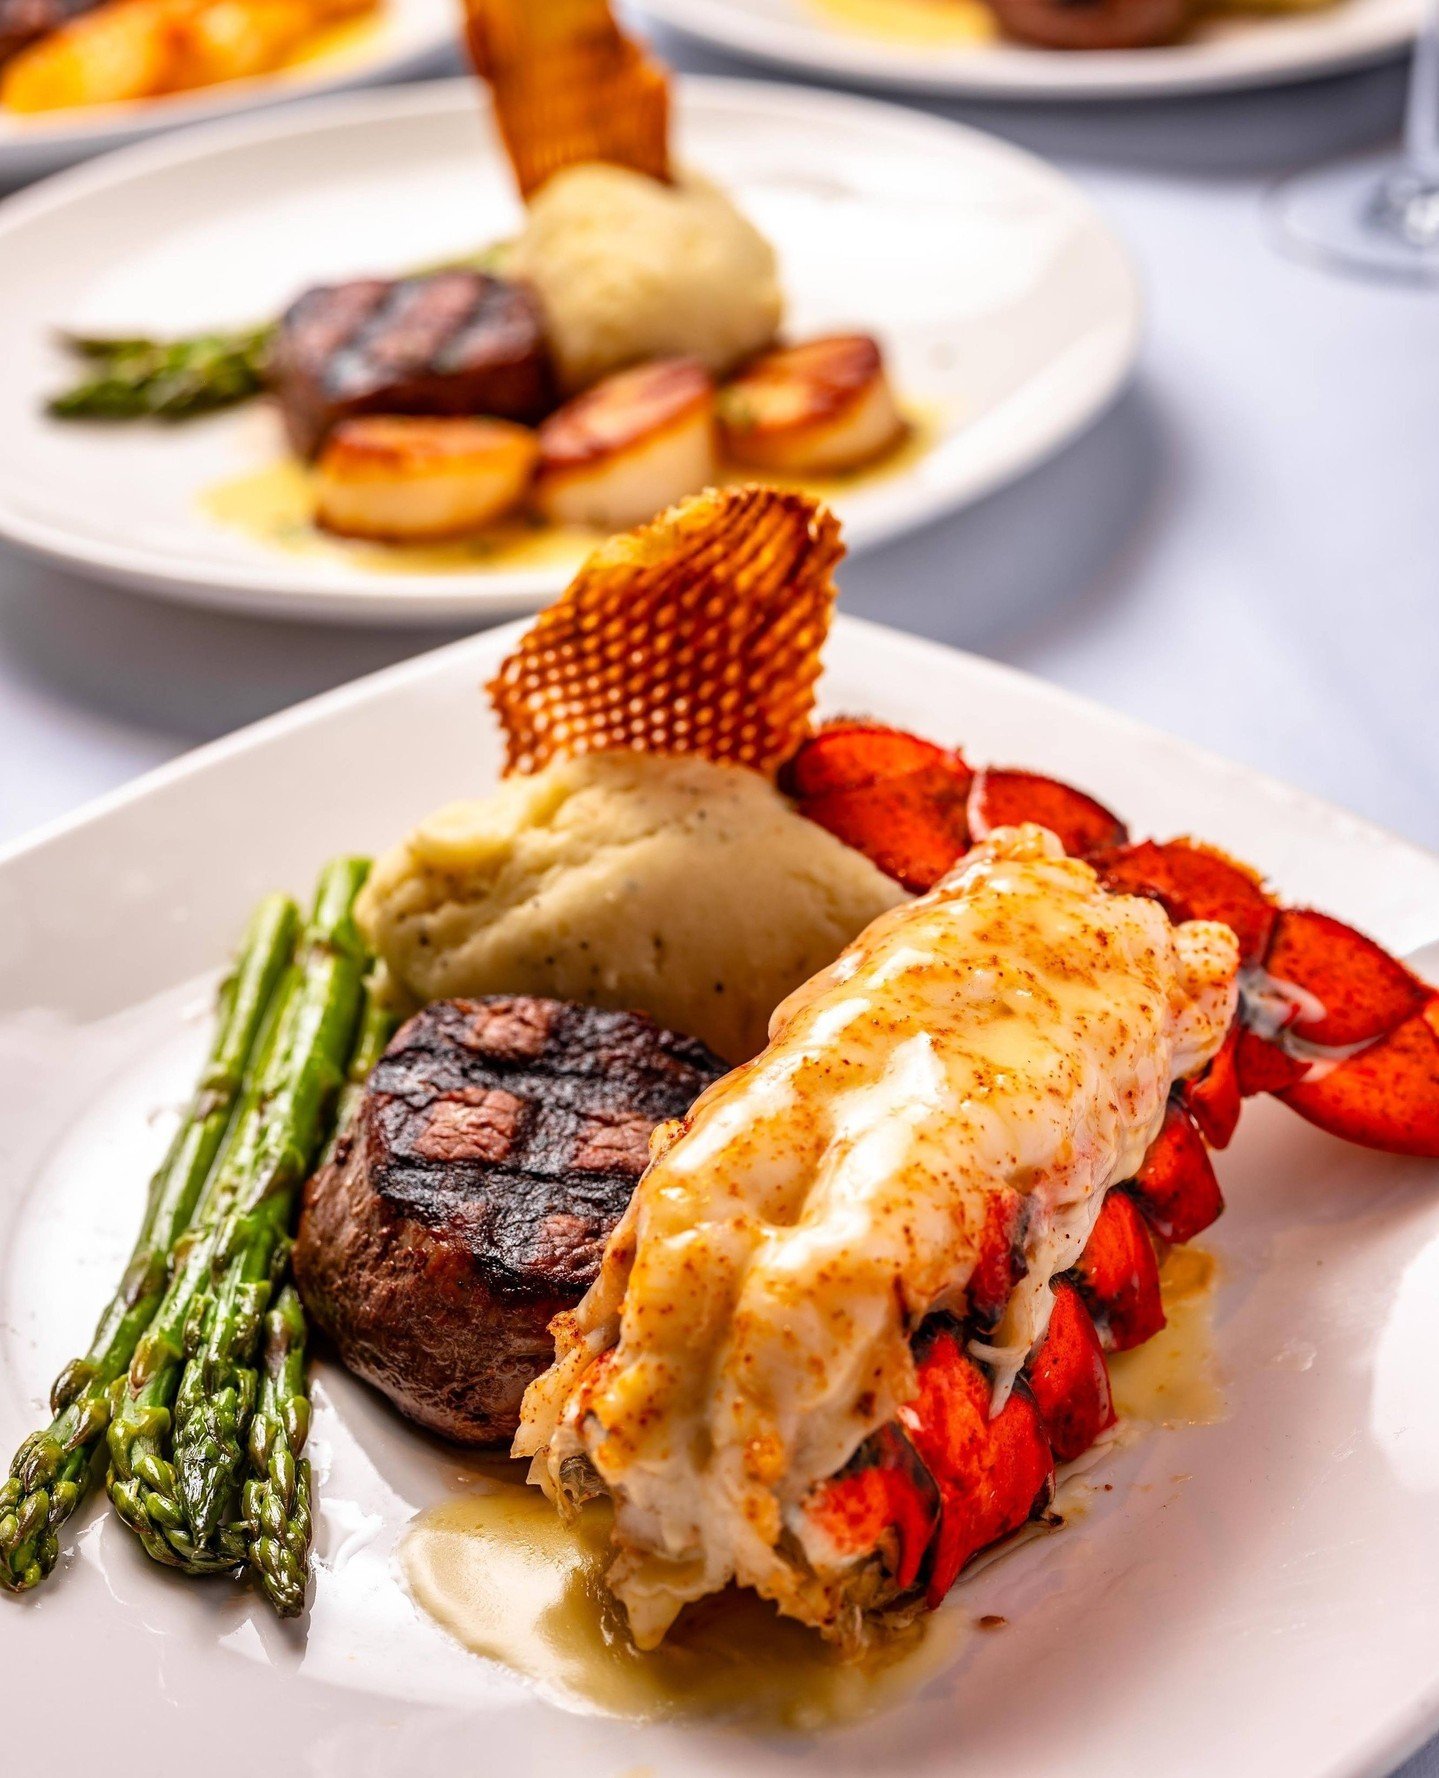 Our Spring Mixed Grill Pix Fixe is here!⁠
⁠
Two Courses for $49, pair a petite filet mignon with:⁠
⁠
🦞 6oz Maine Lobster Tail⁠
🐟 Seared New Bedford Scallops⁠
🦐 Saut&eacute;ed Gulf Shrimp⁠
🐟 Gulf of Maine Salmon⁠
⁠
Take $10 off during Happy Hour a